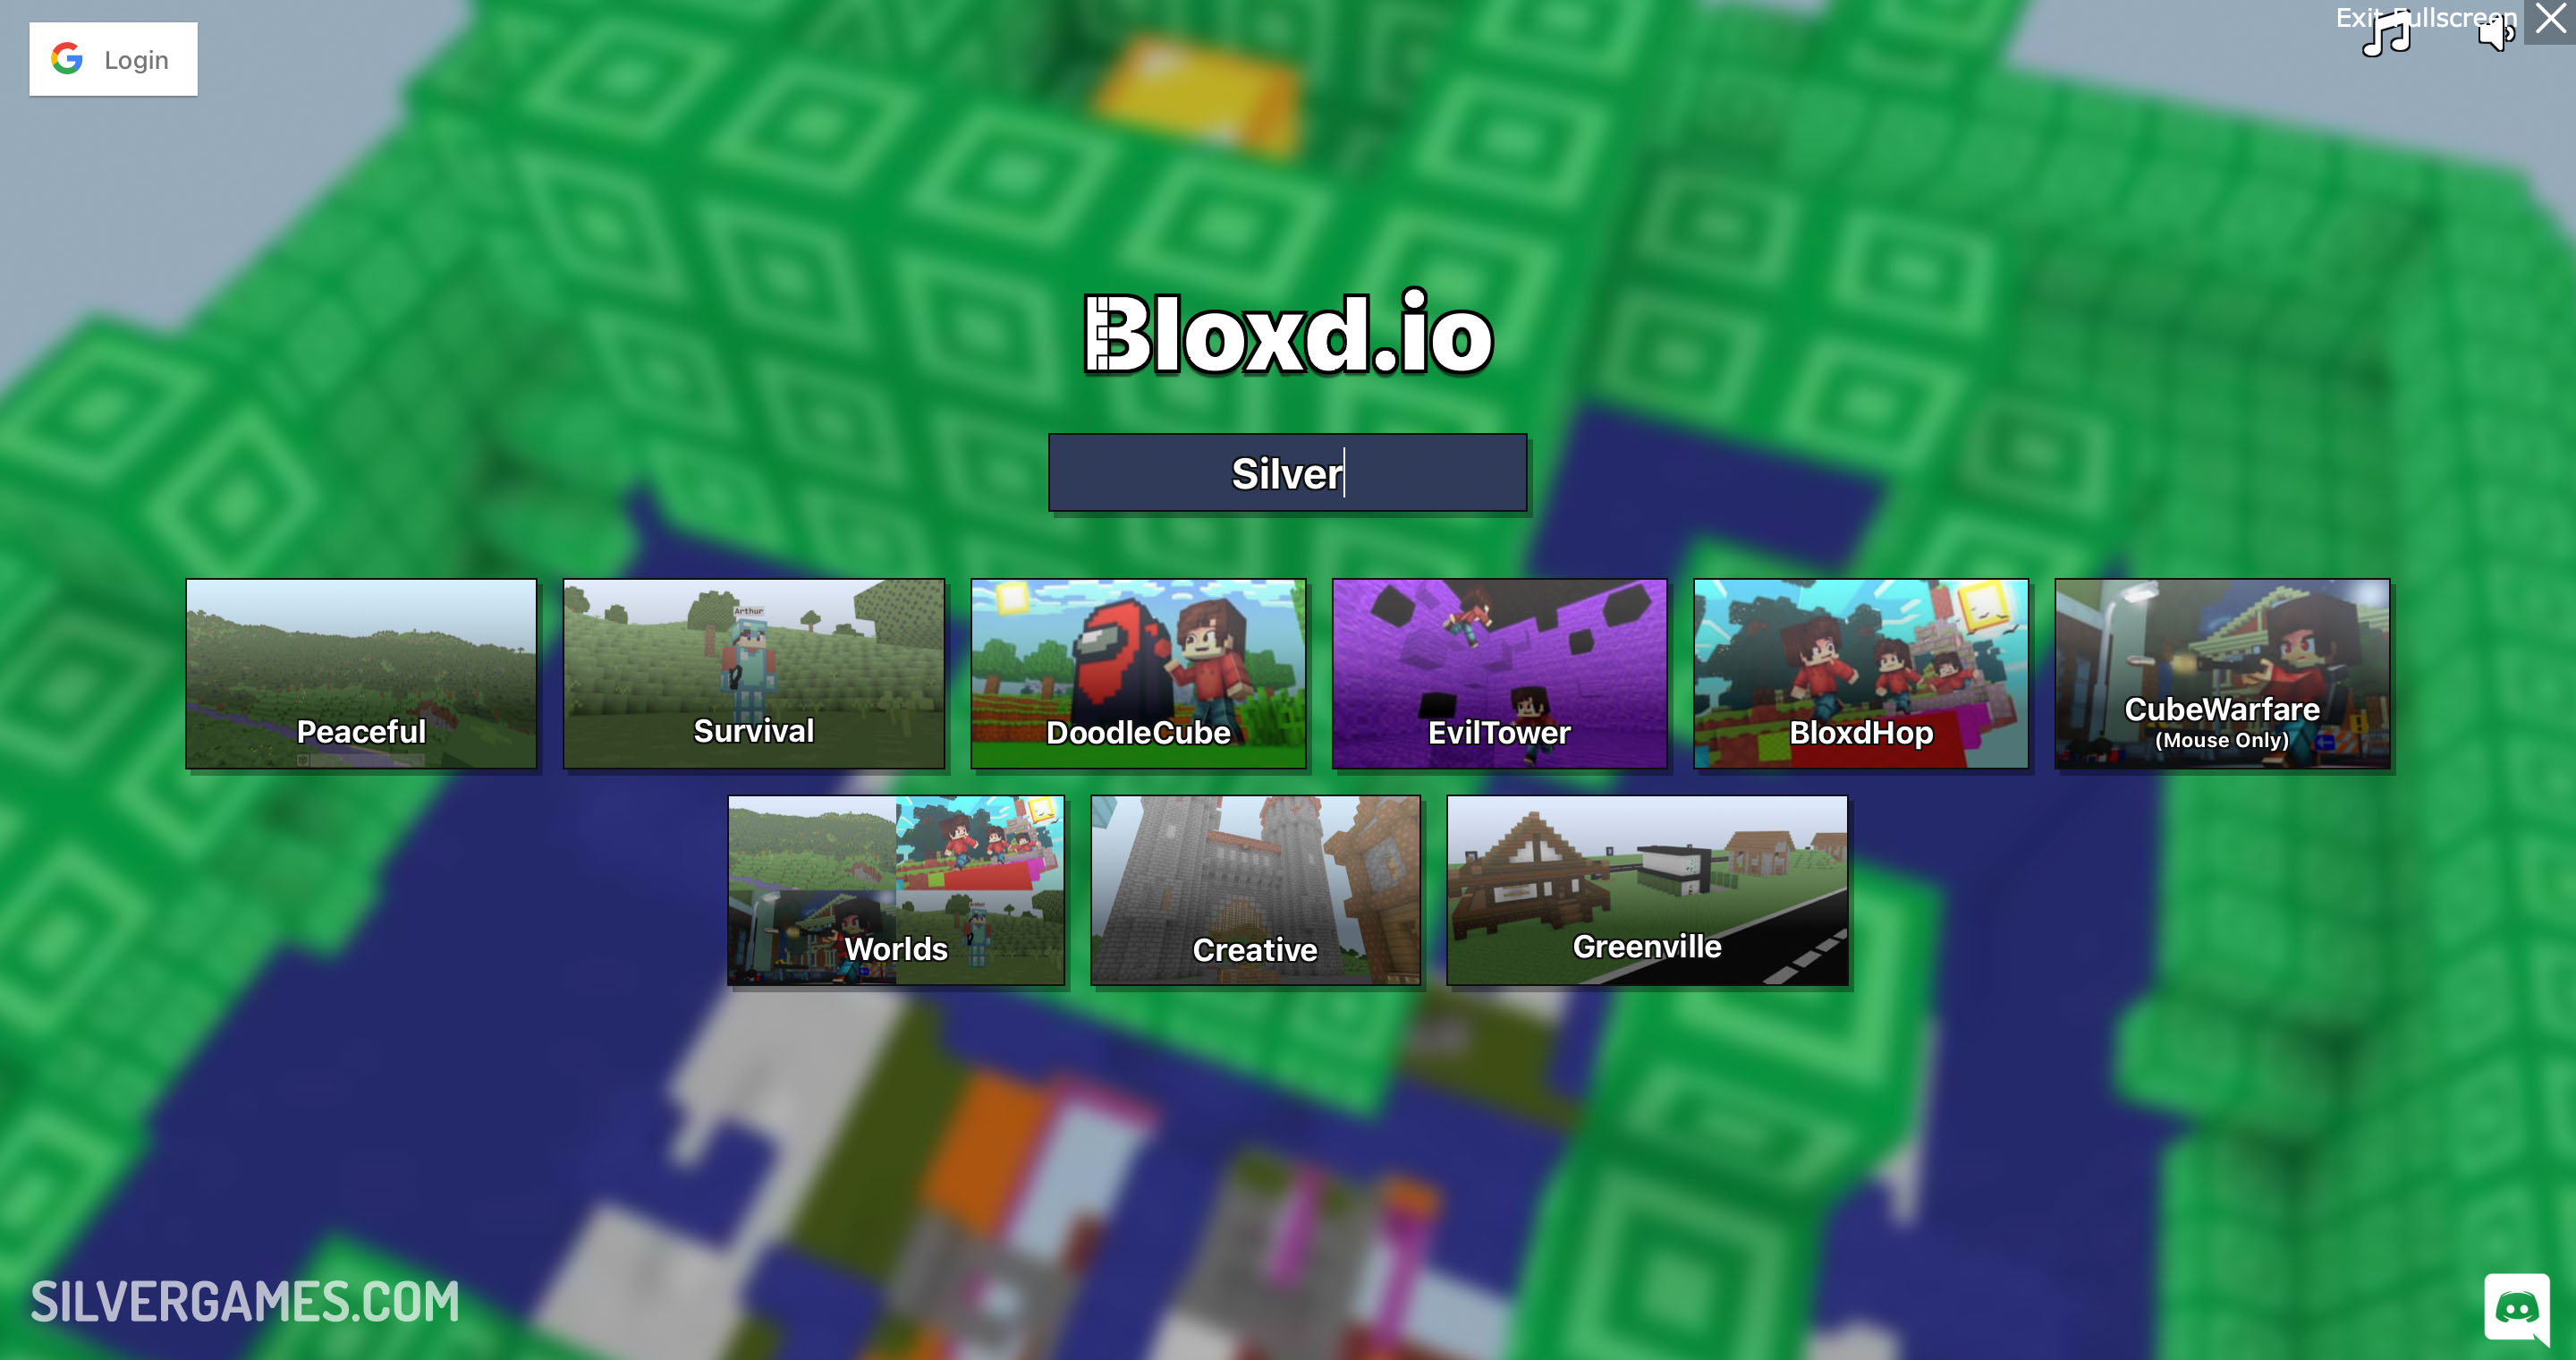 Super Bloxd io clutch on now gg #nowgg #bloxd io 